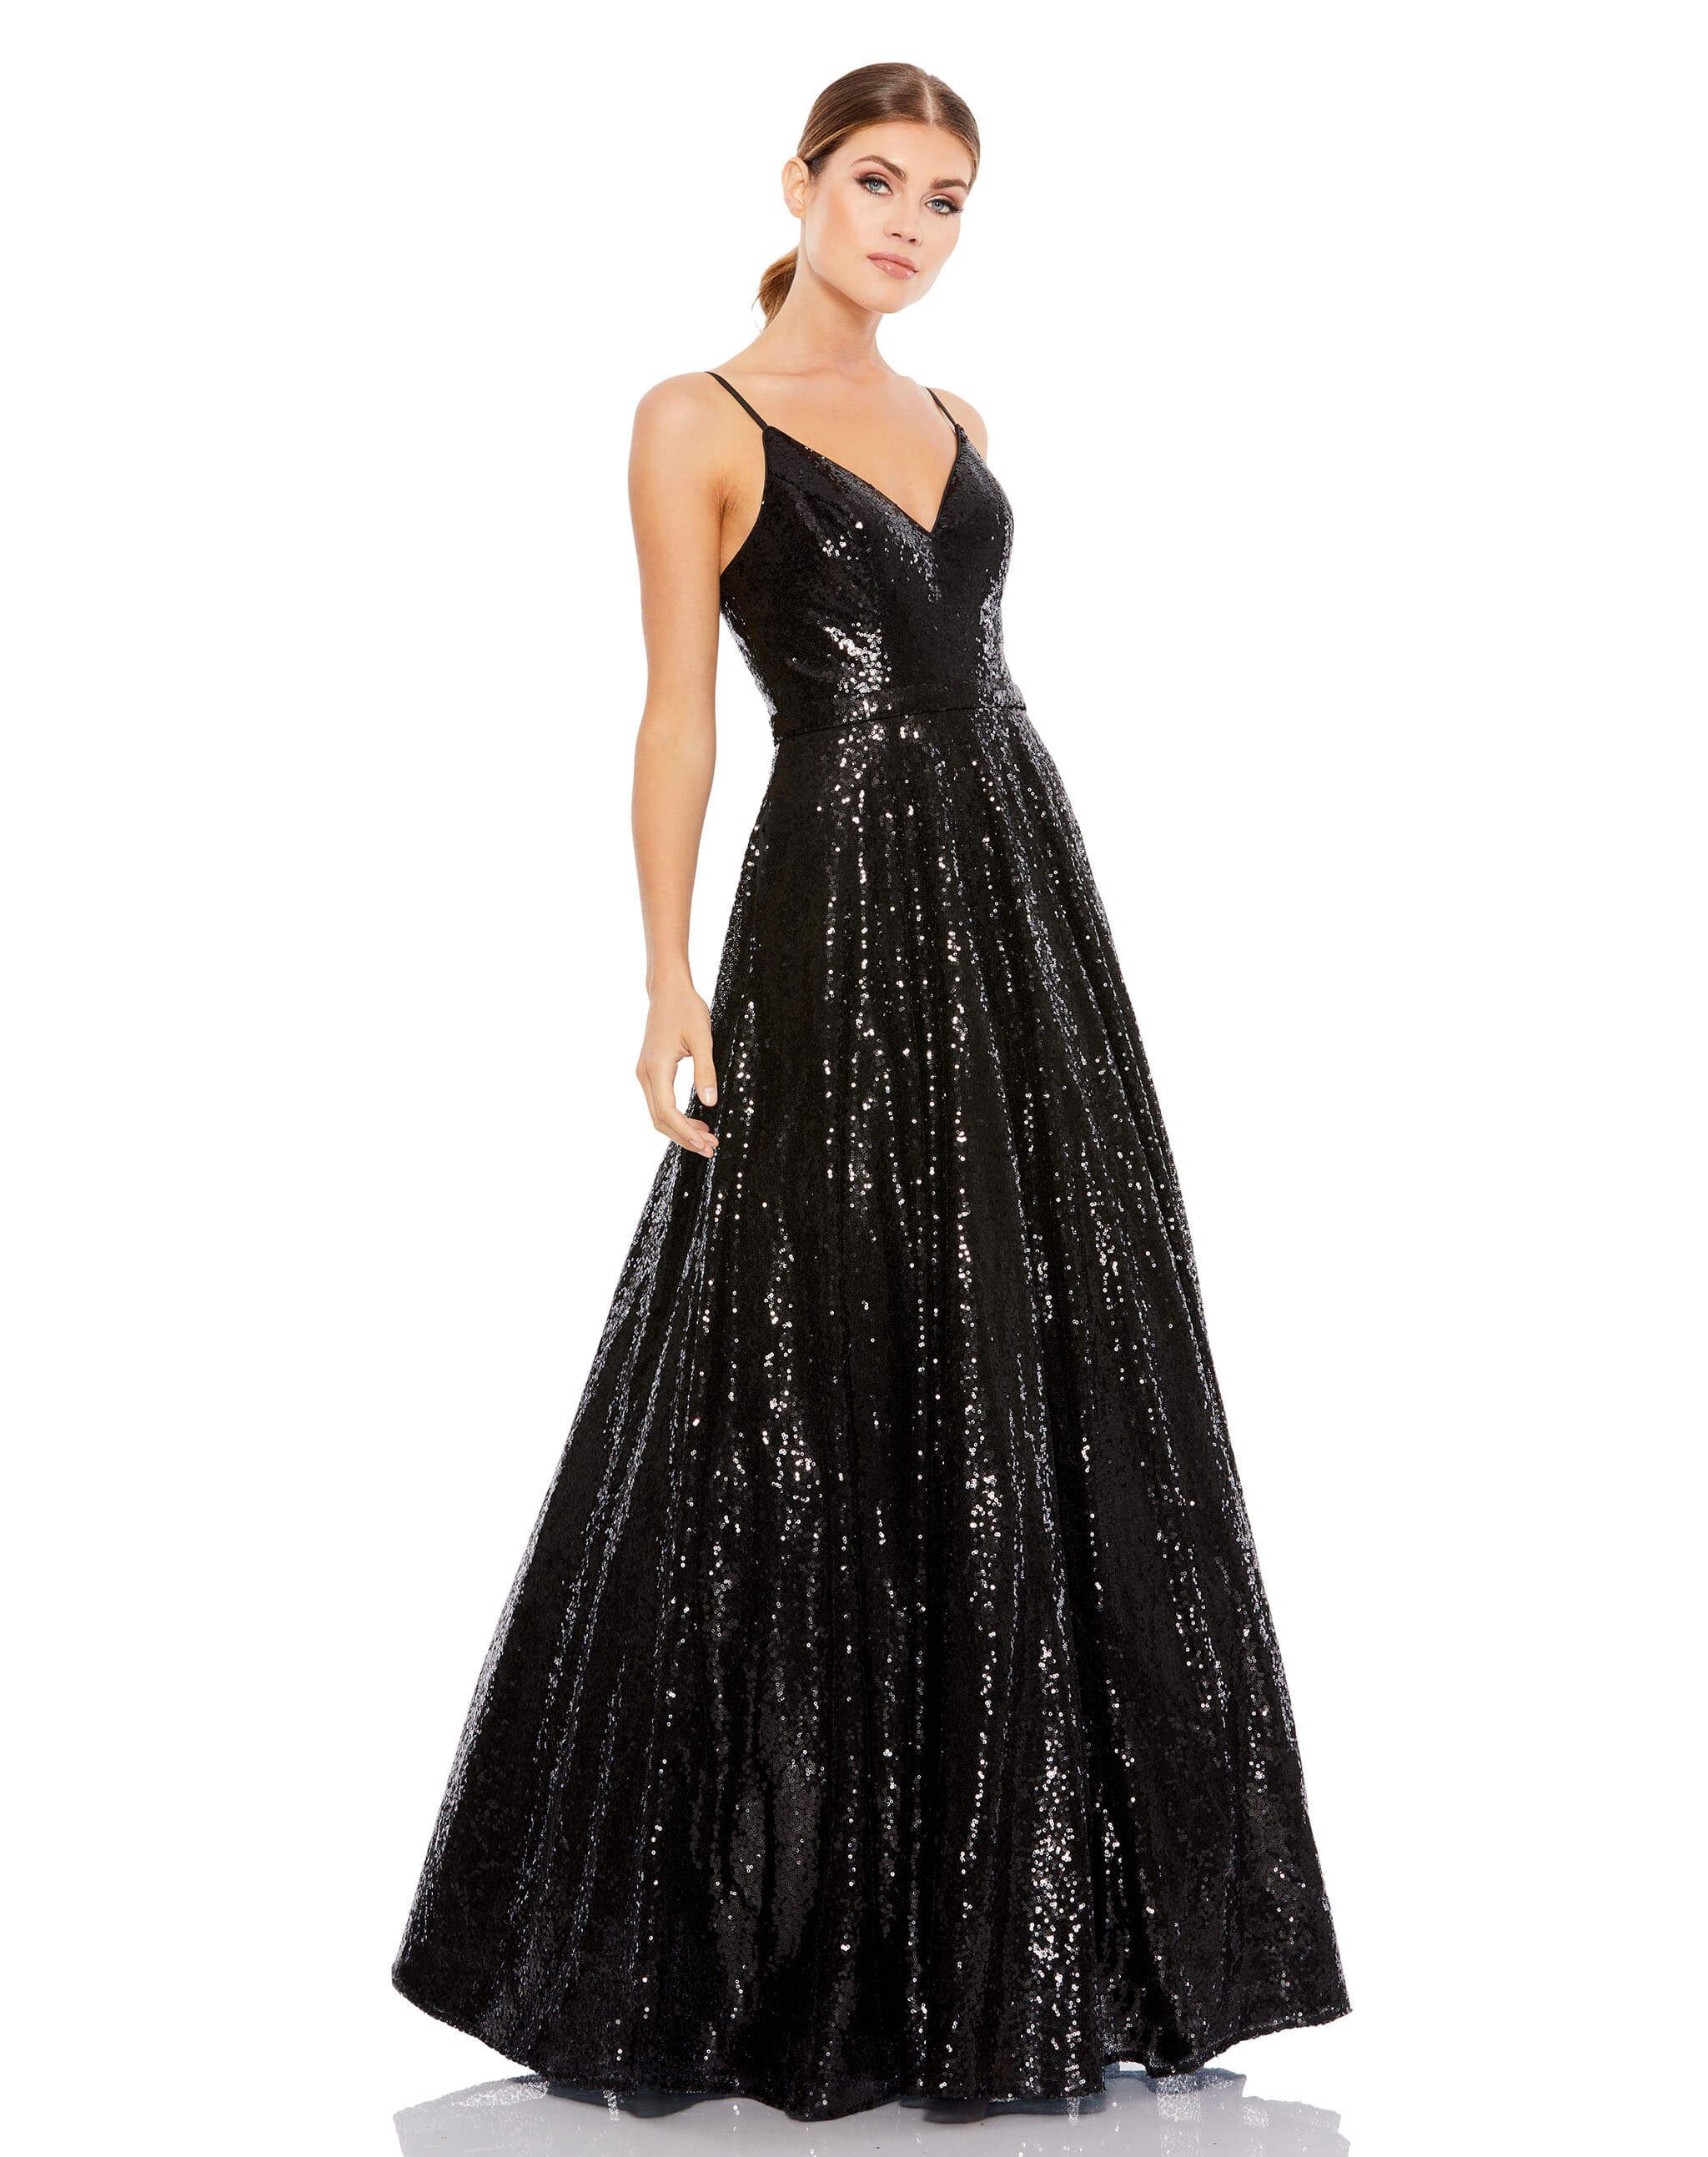 V-Neck Sequined Ball Gown - FINAL SALE